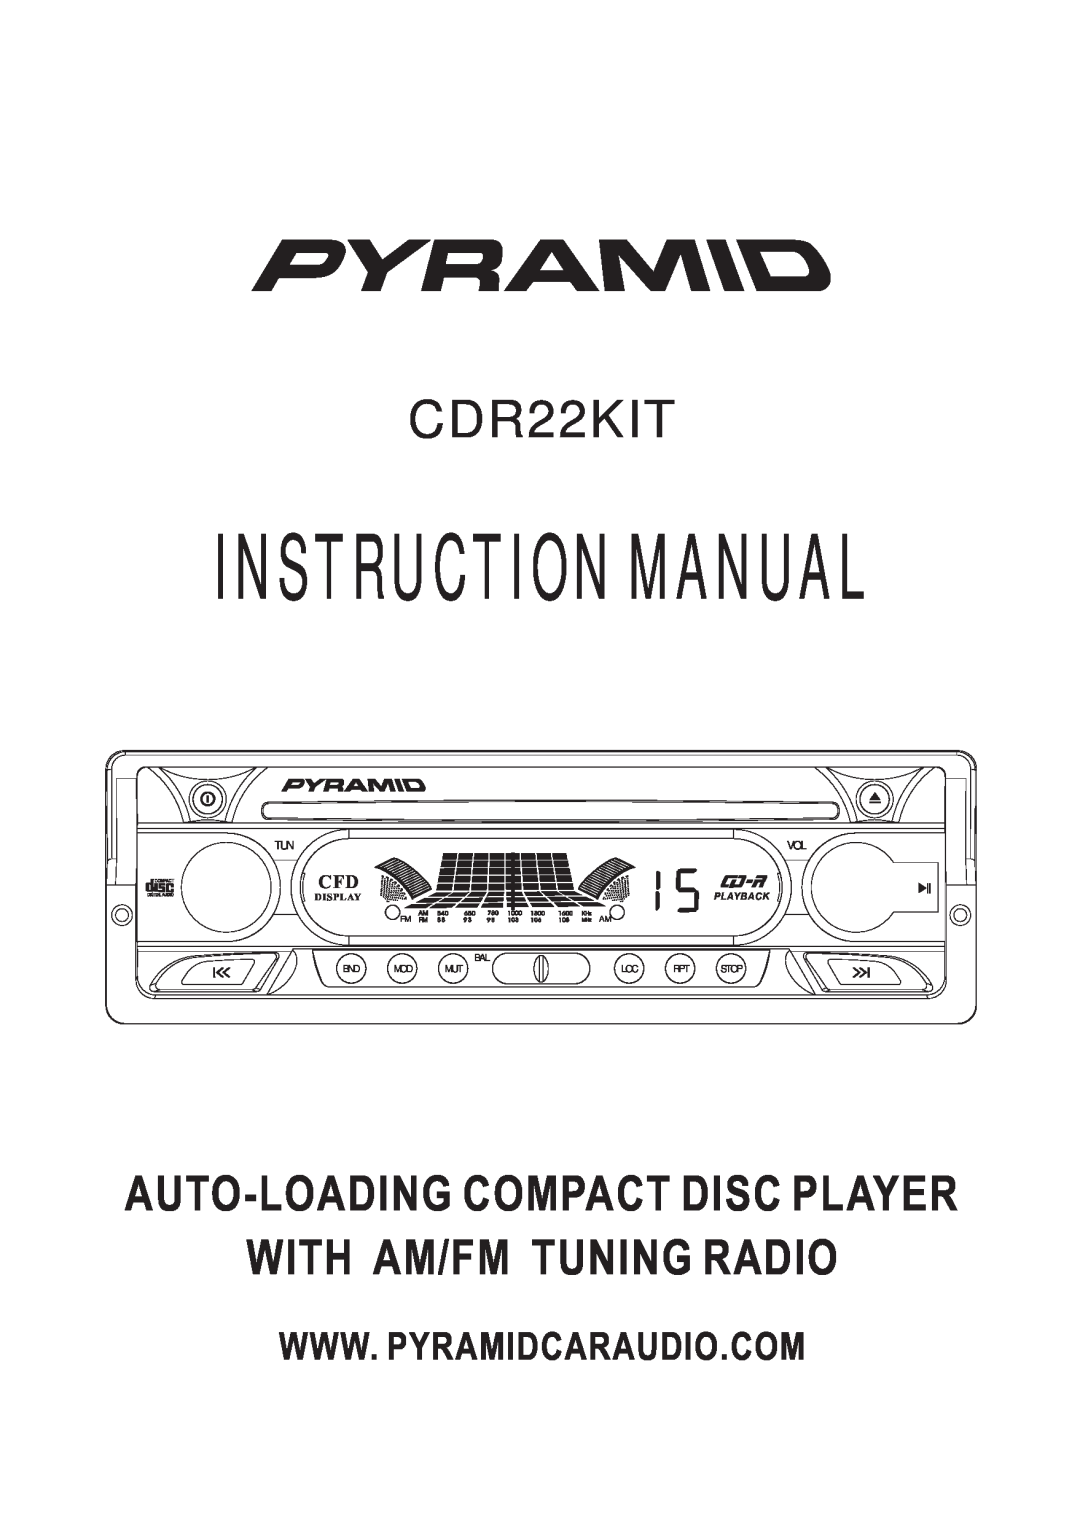 Pyramid Car Audio CDR22KIT instruction manual Auto-Loadingcompact Disc Player, With Am/Fm Tuning Radio, Display, Playback 